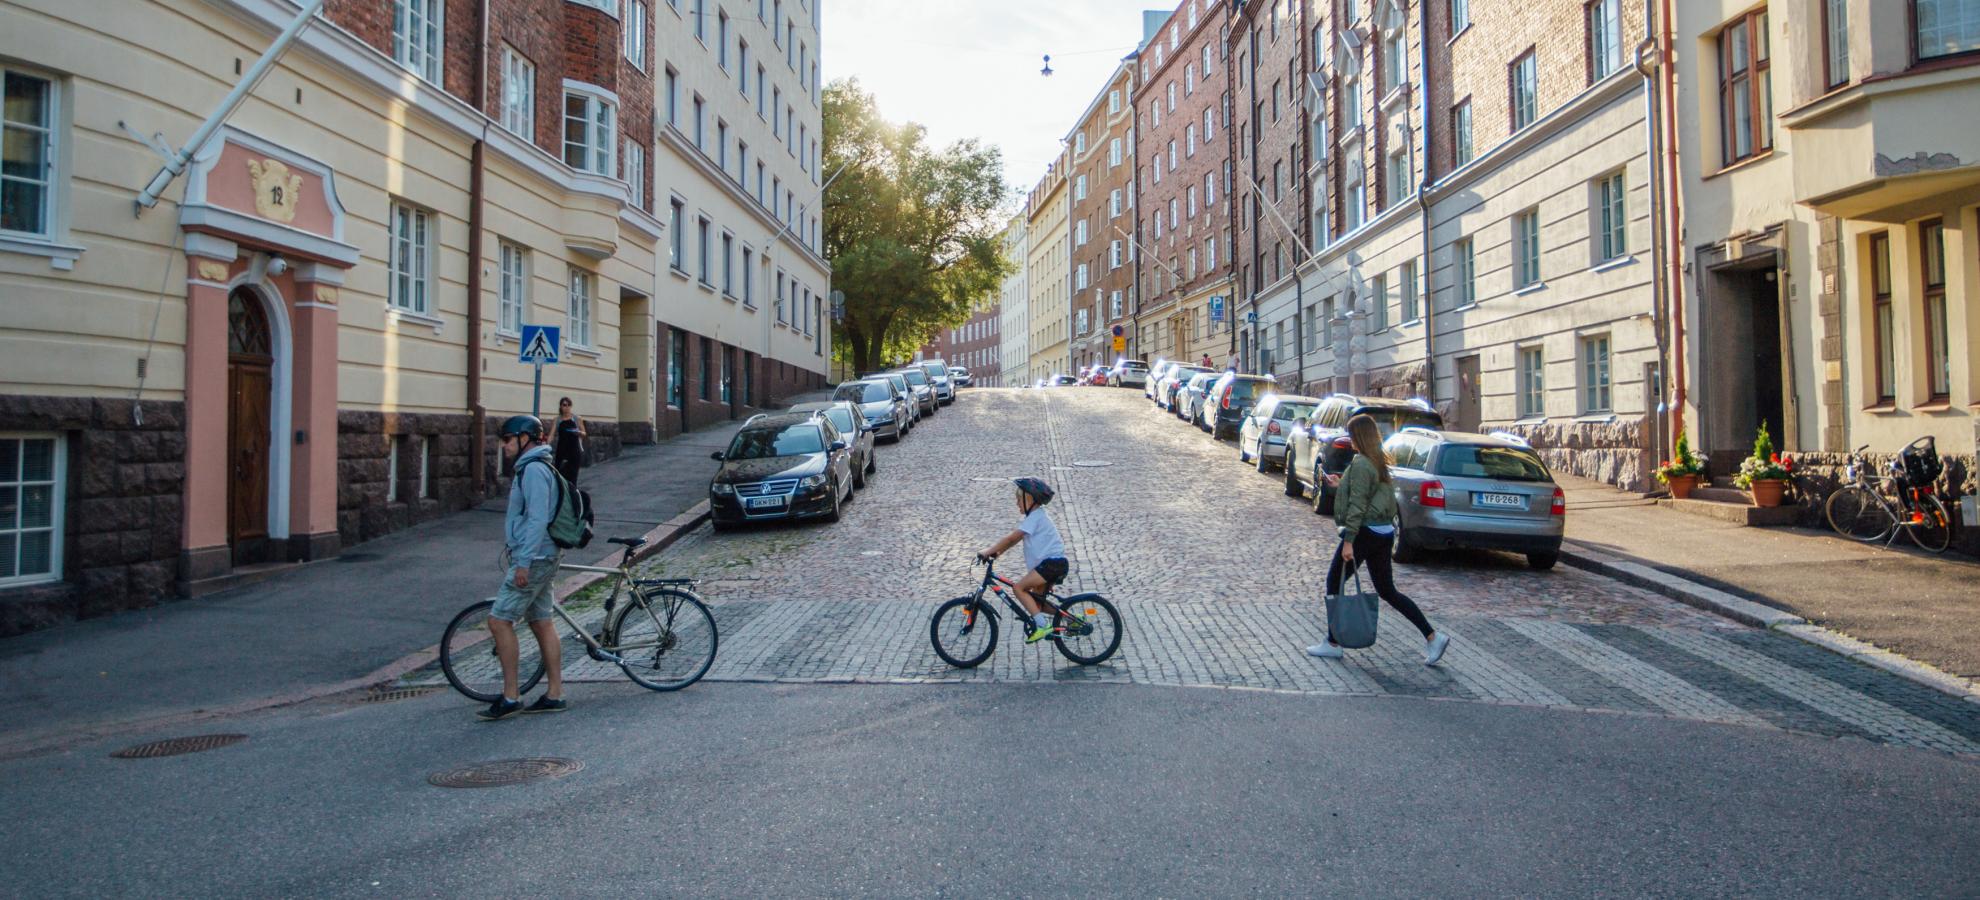 Cyclists and a pedestrian cross a street crossing in Töölö, with a variety of traditional apartment buildings going up the hill either side.